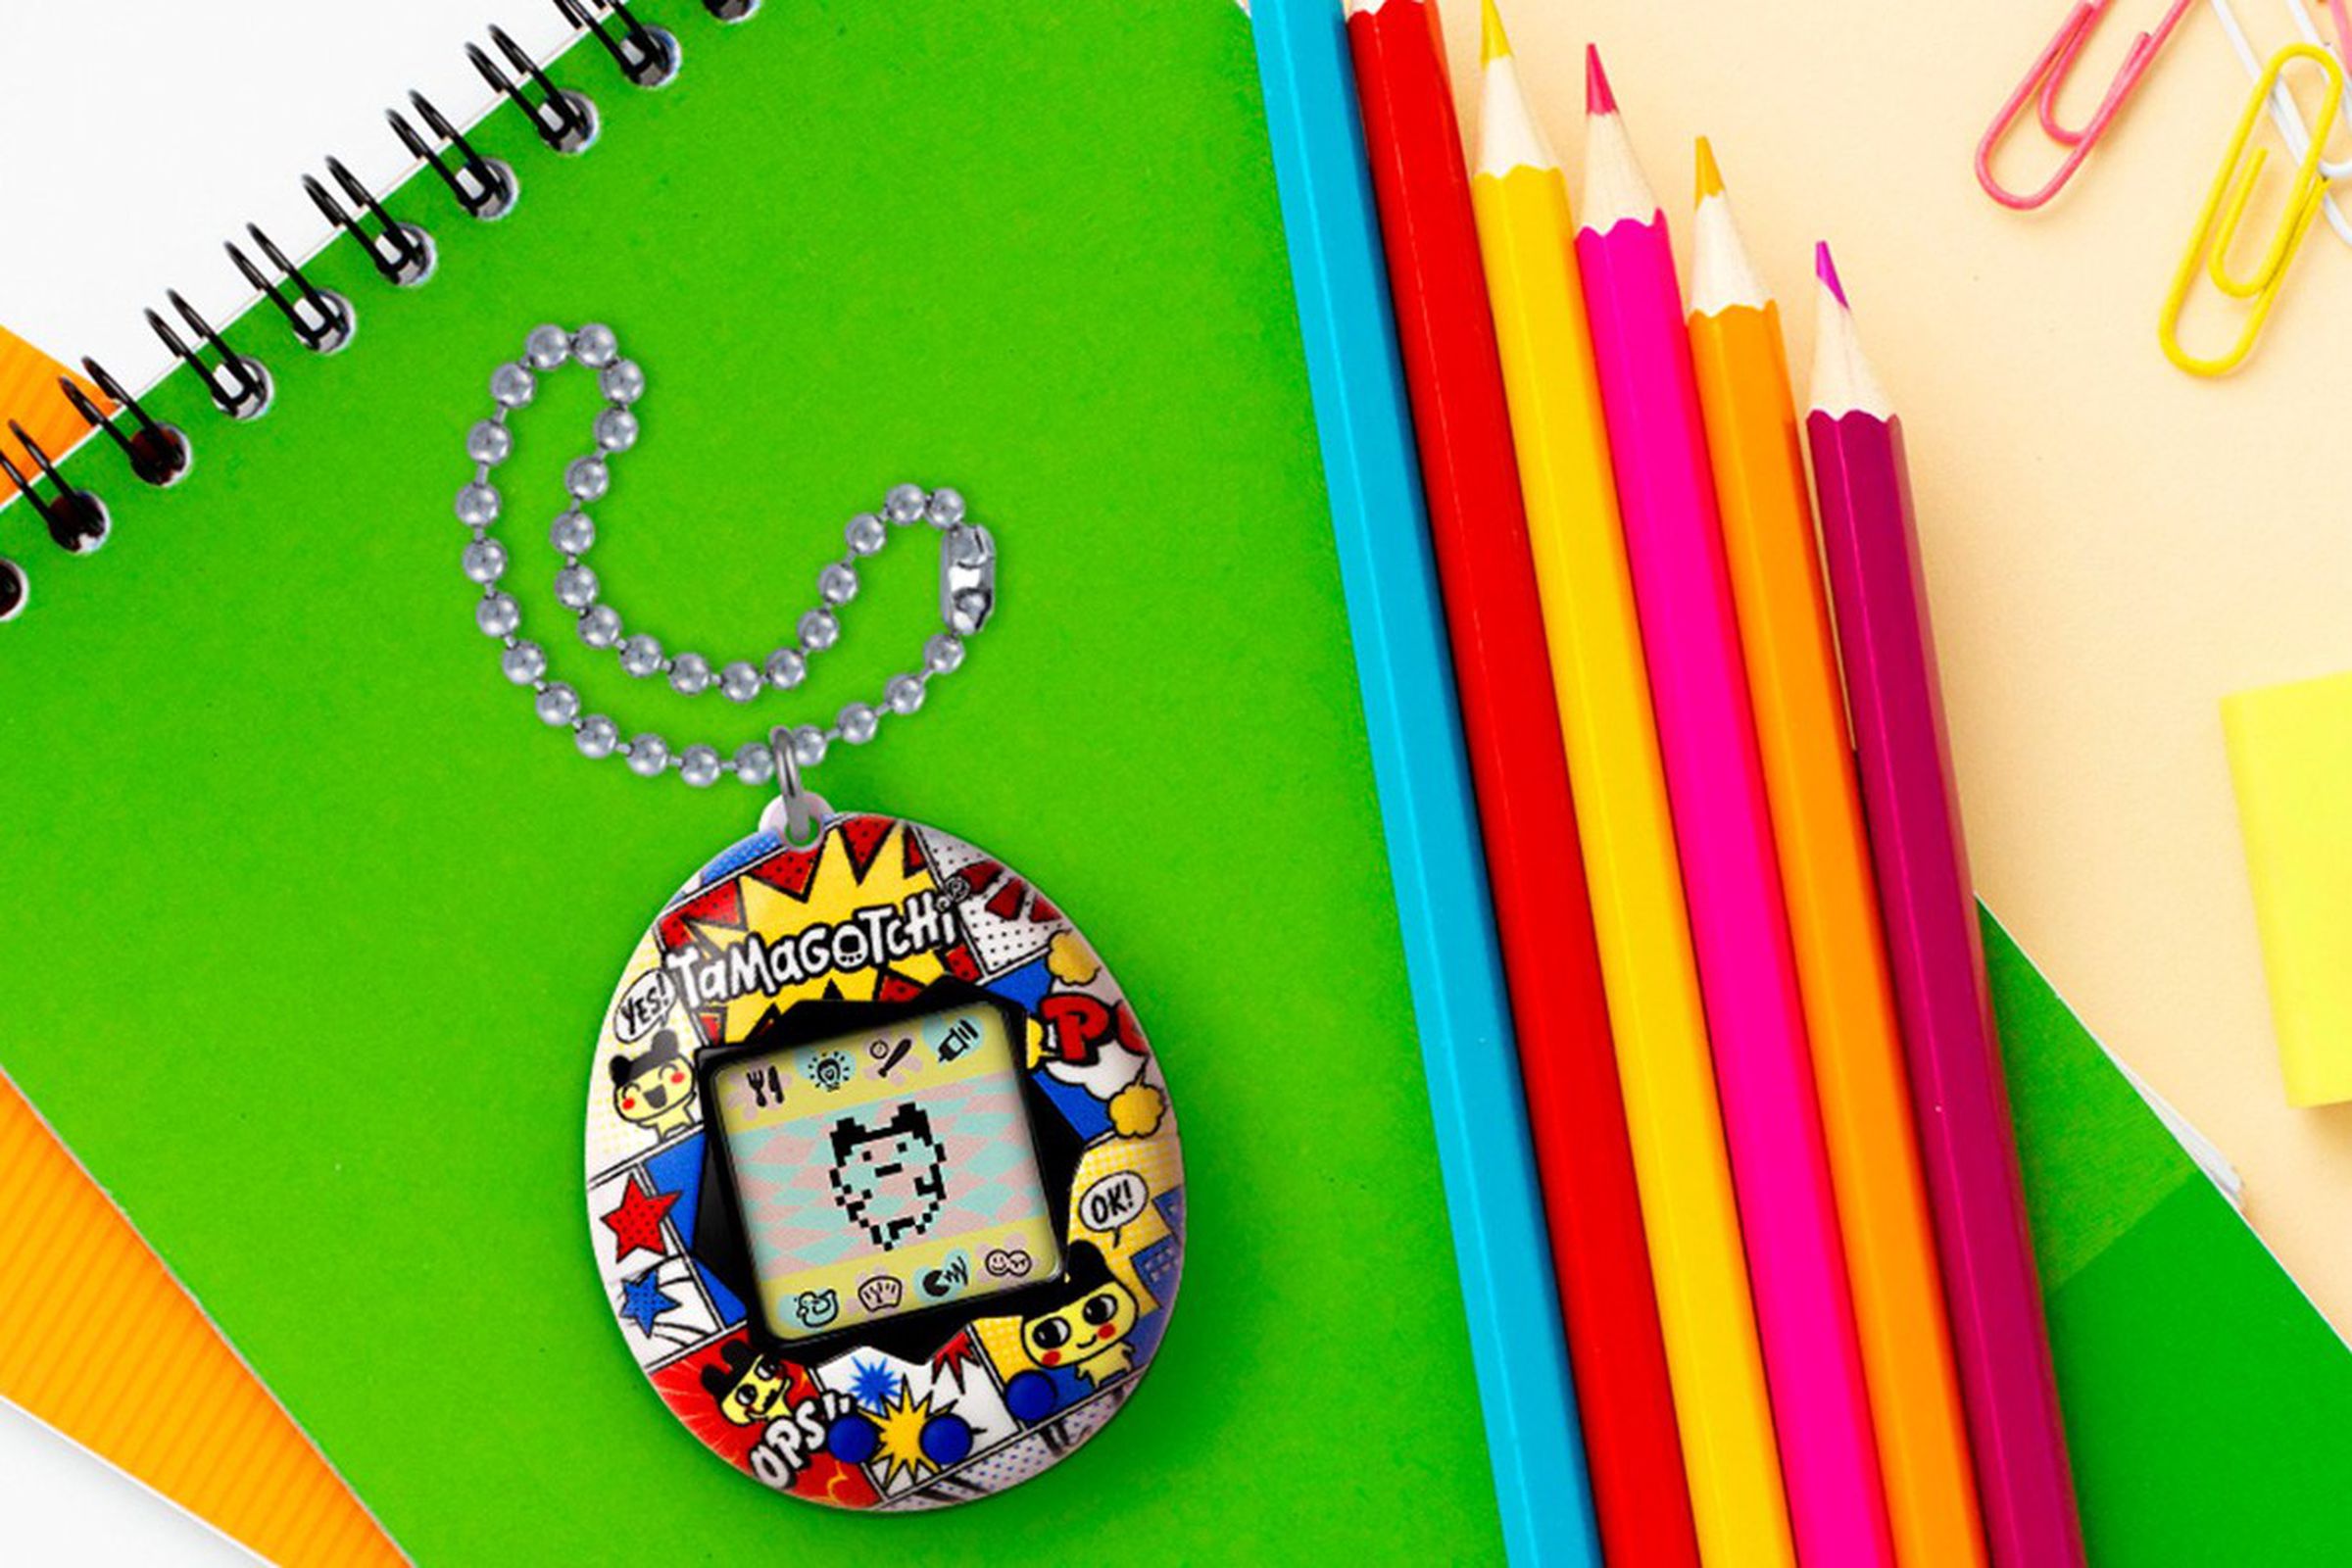 A bright and colorful Tamagotchi resting on a green notebook near colored pencils.